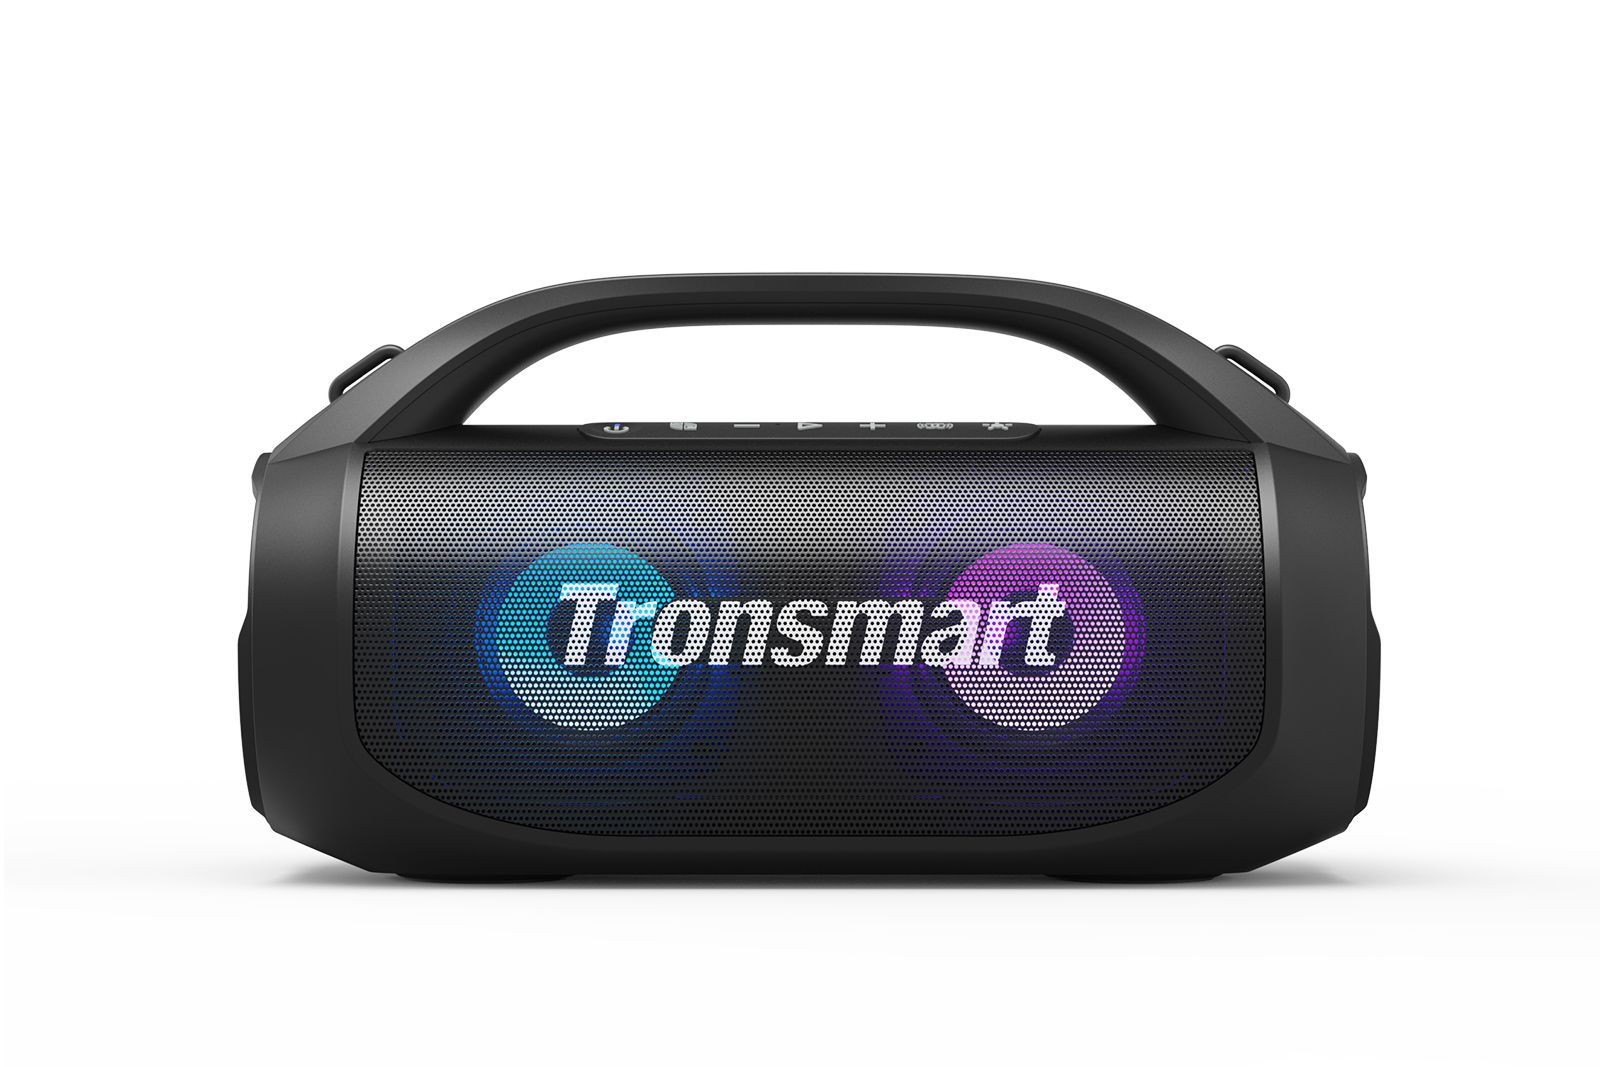 The Tronsmart Bang is a Loud Outdoor Speaker! In-Depth Review and